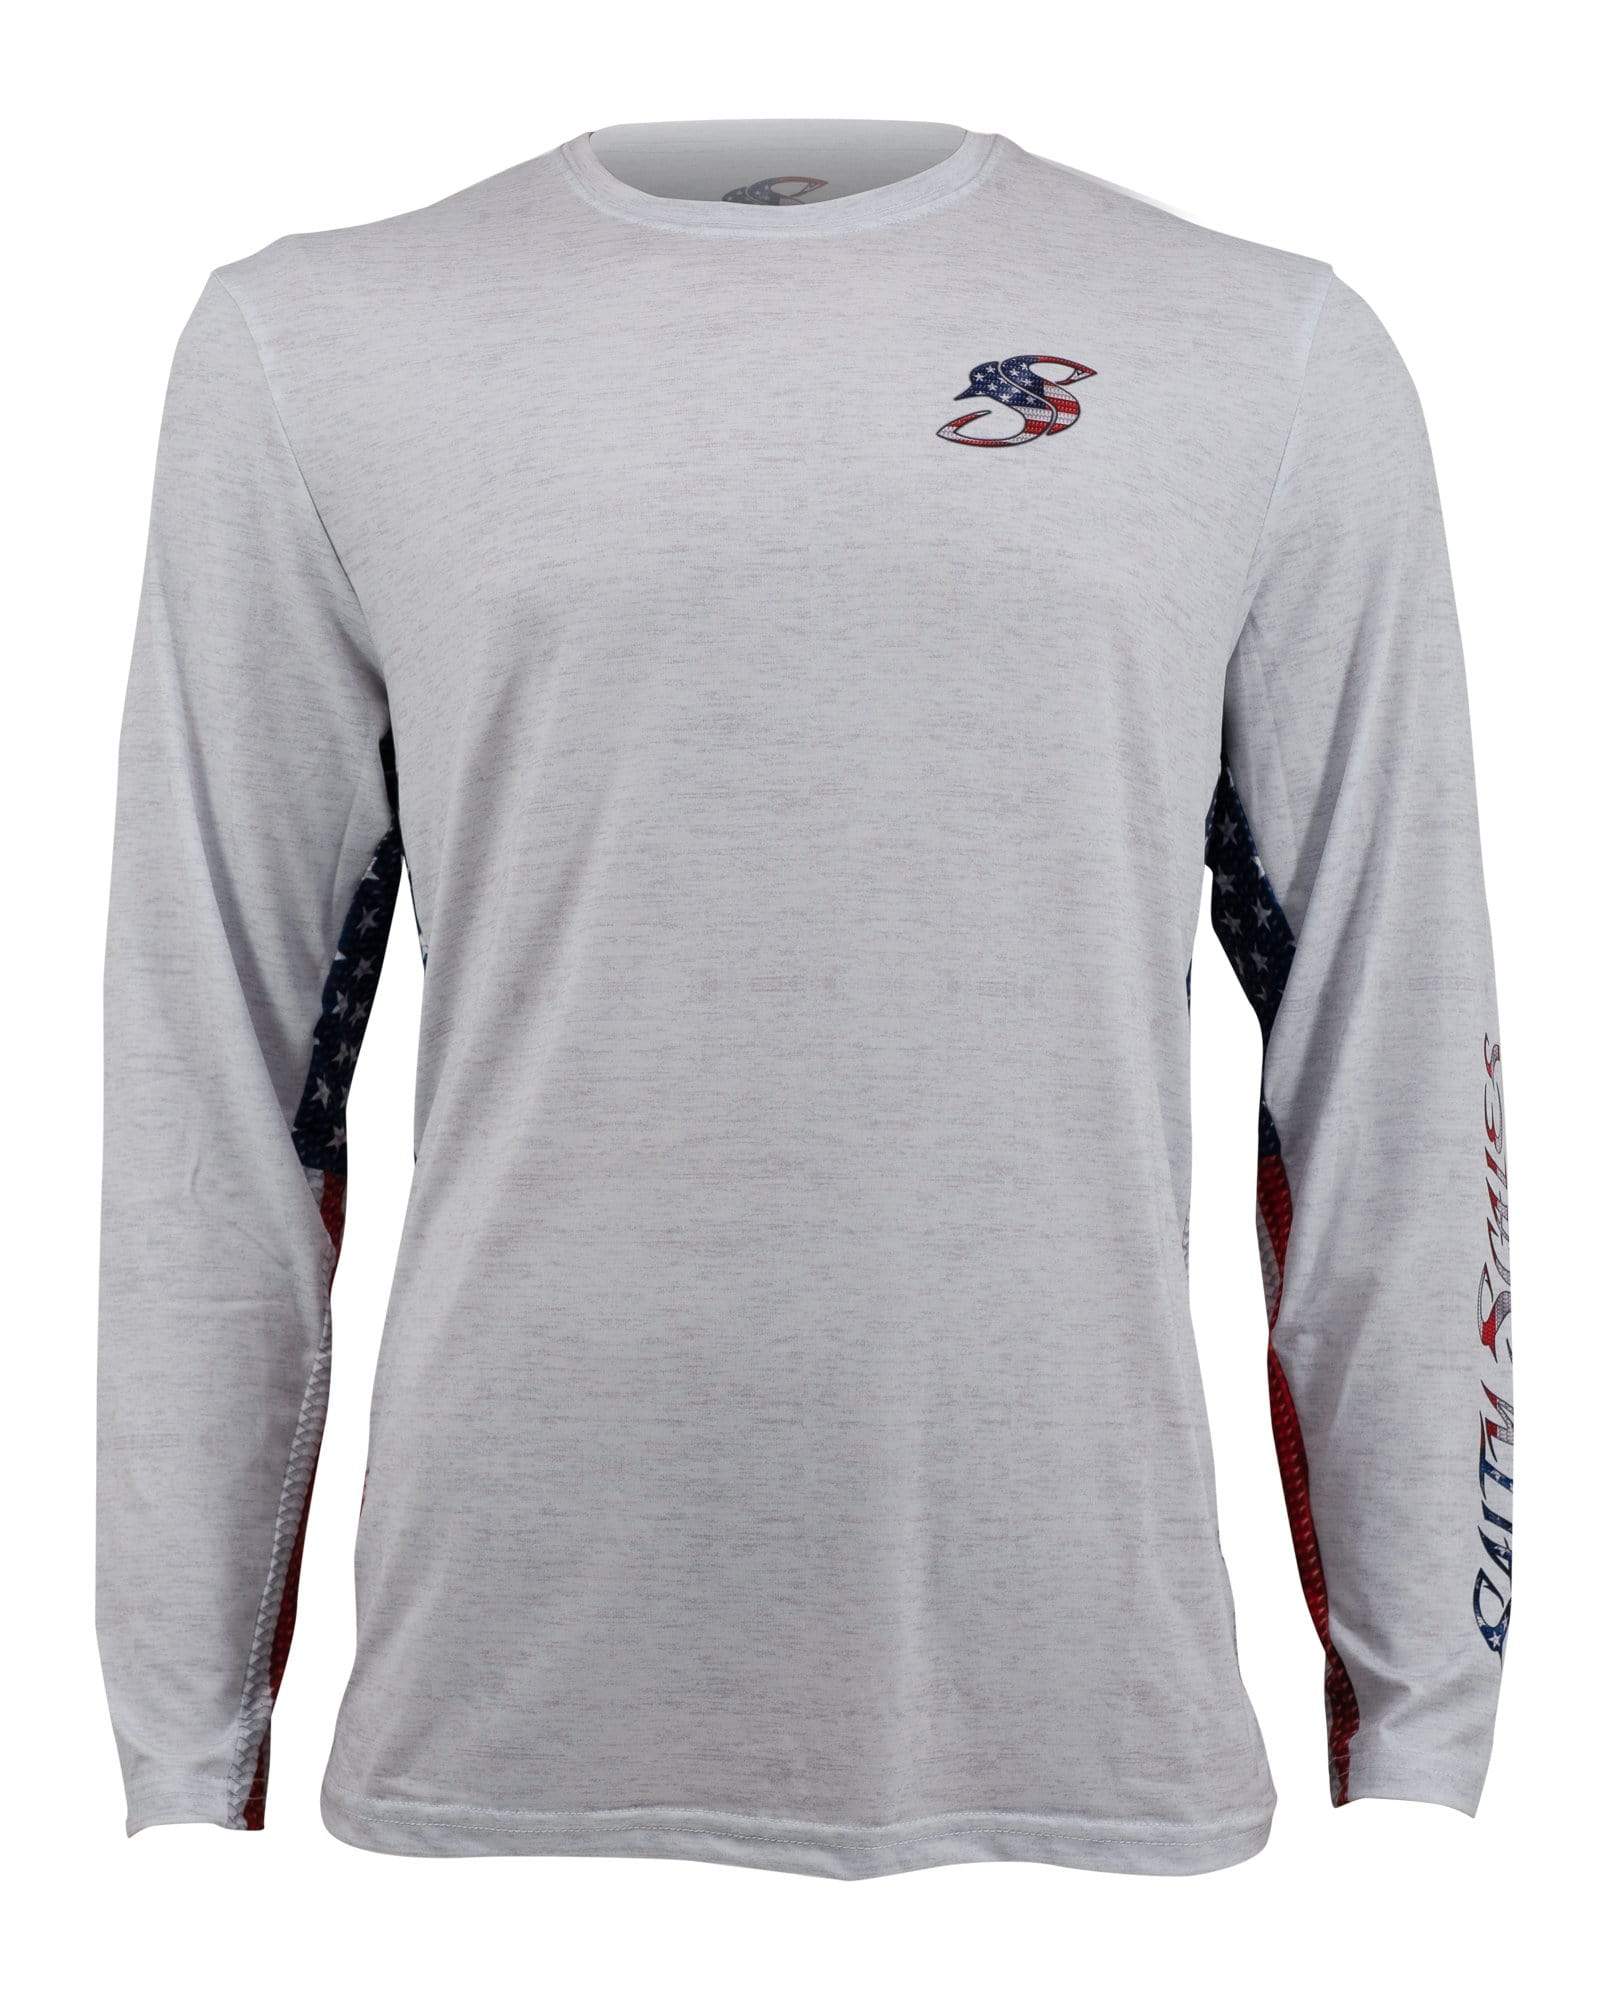 Salty Paws Dry-Fit Performance UPF40+ Long Sleeve Fishing Shirt